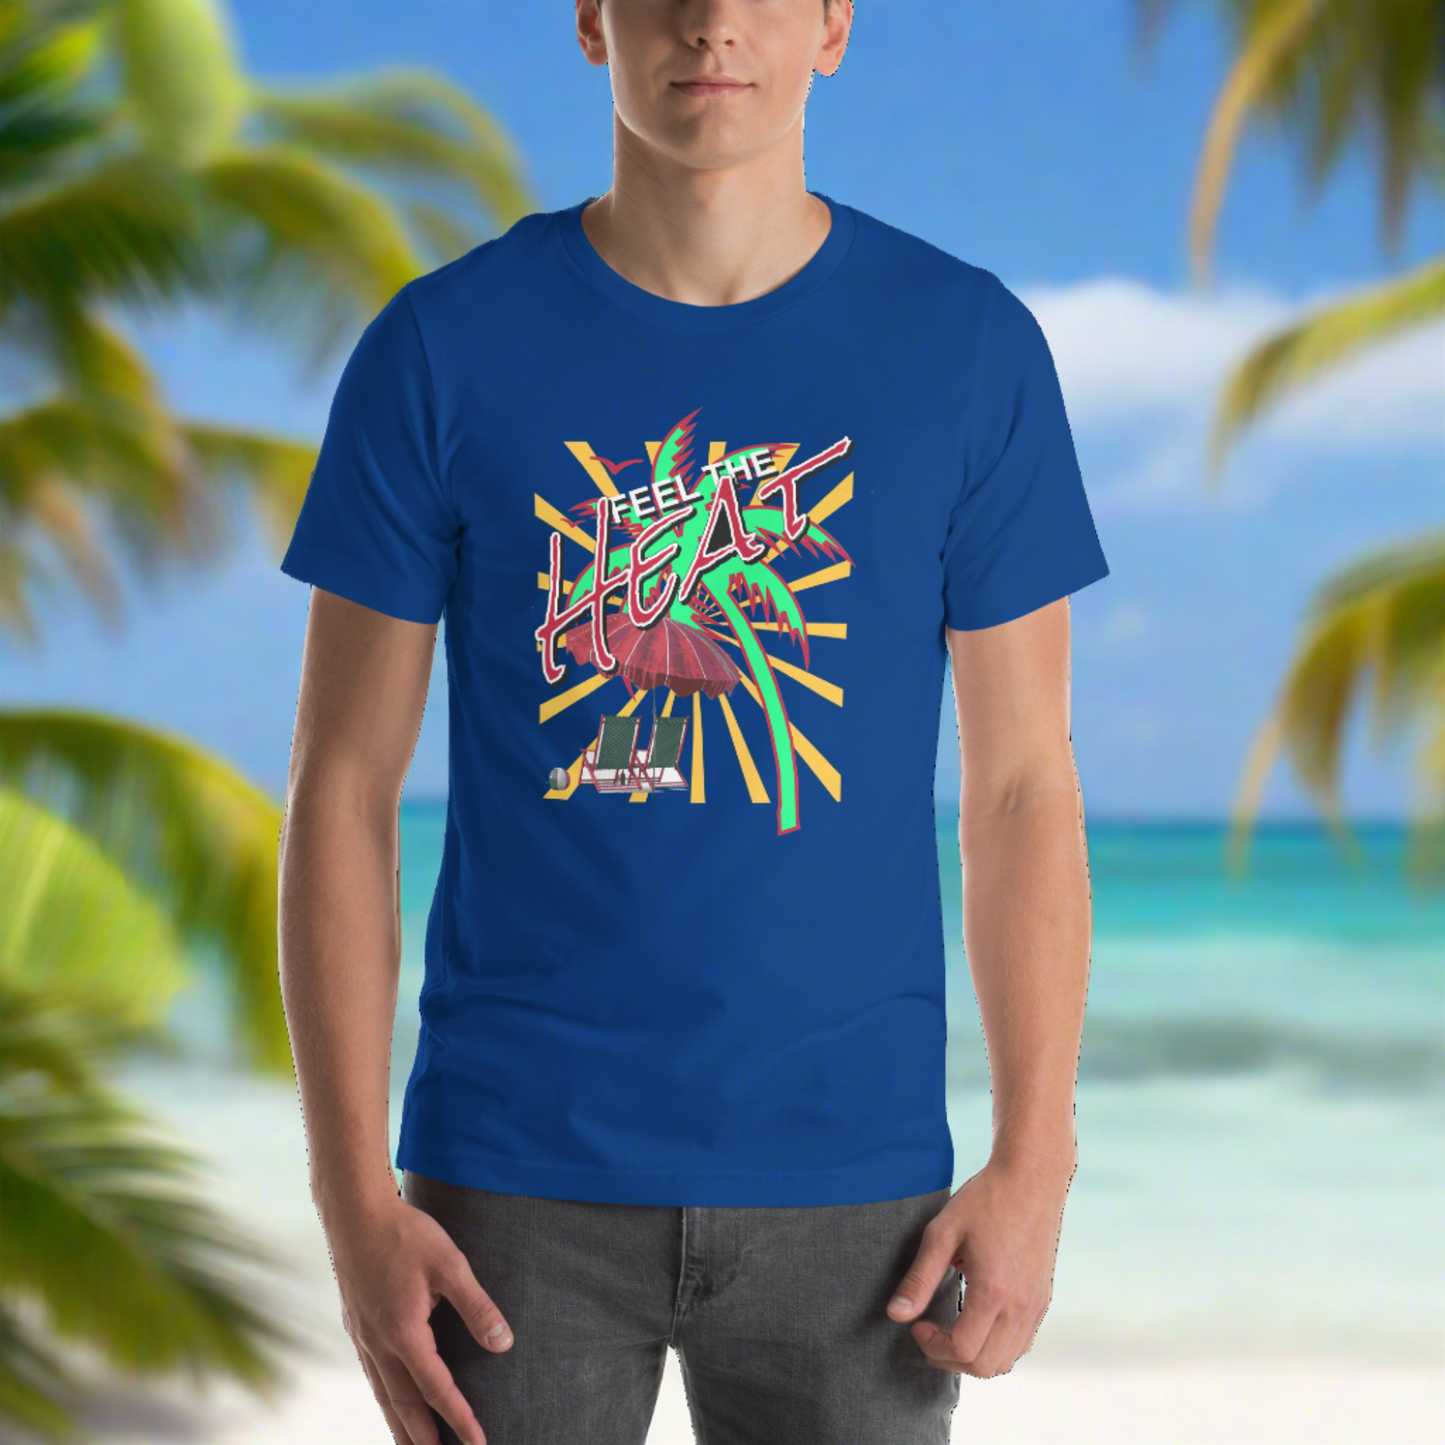 "Royal Blue Serenity: Dive into Summer with our 'Feel the Heat' Tee! 💙🌴 Available at PuraFashions.com 🔥 #TropicVibes #BeachLife #SummerEssentials"